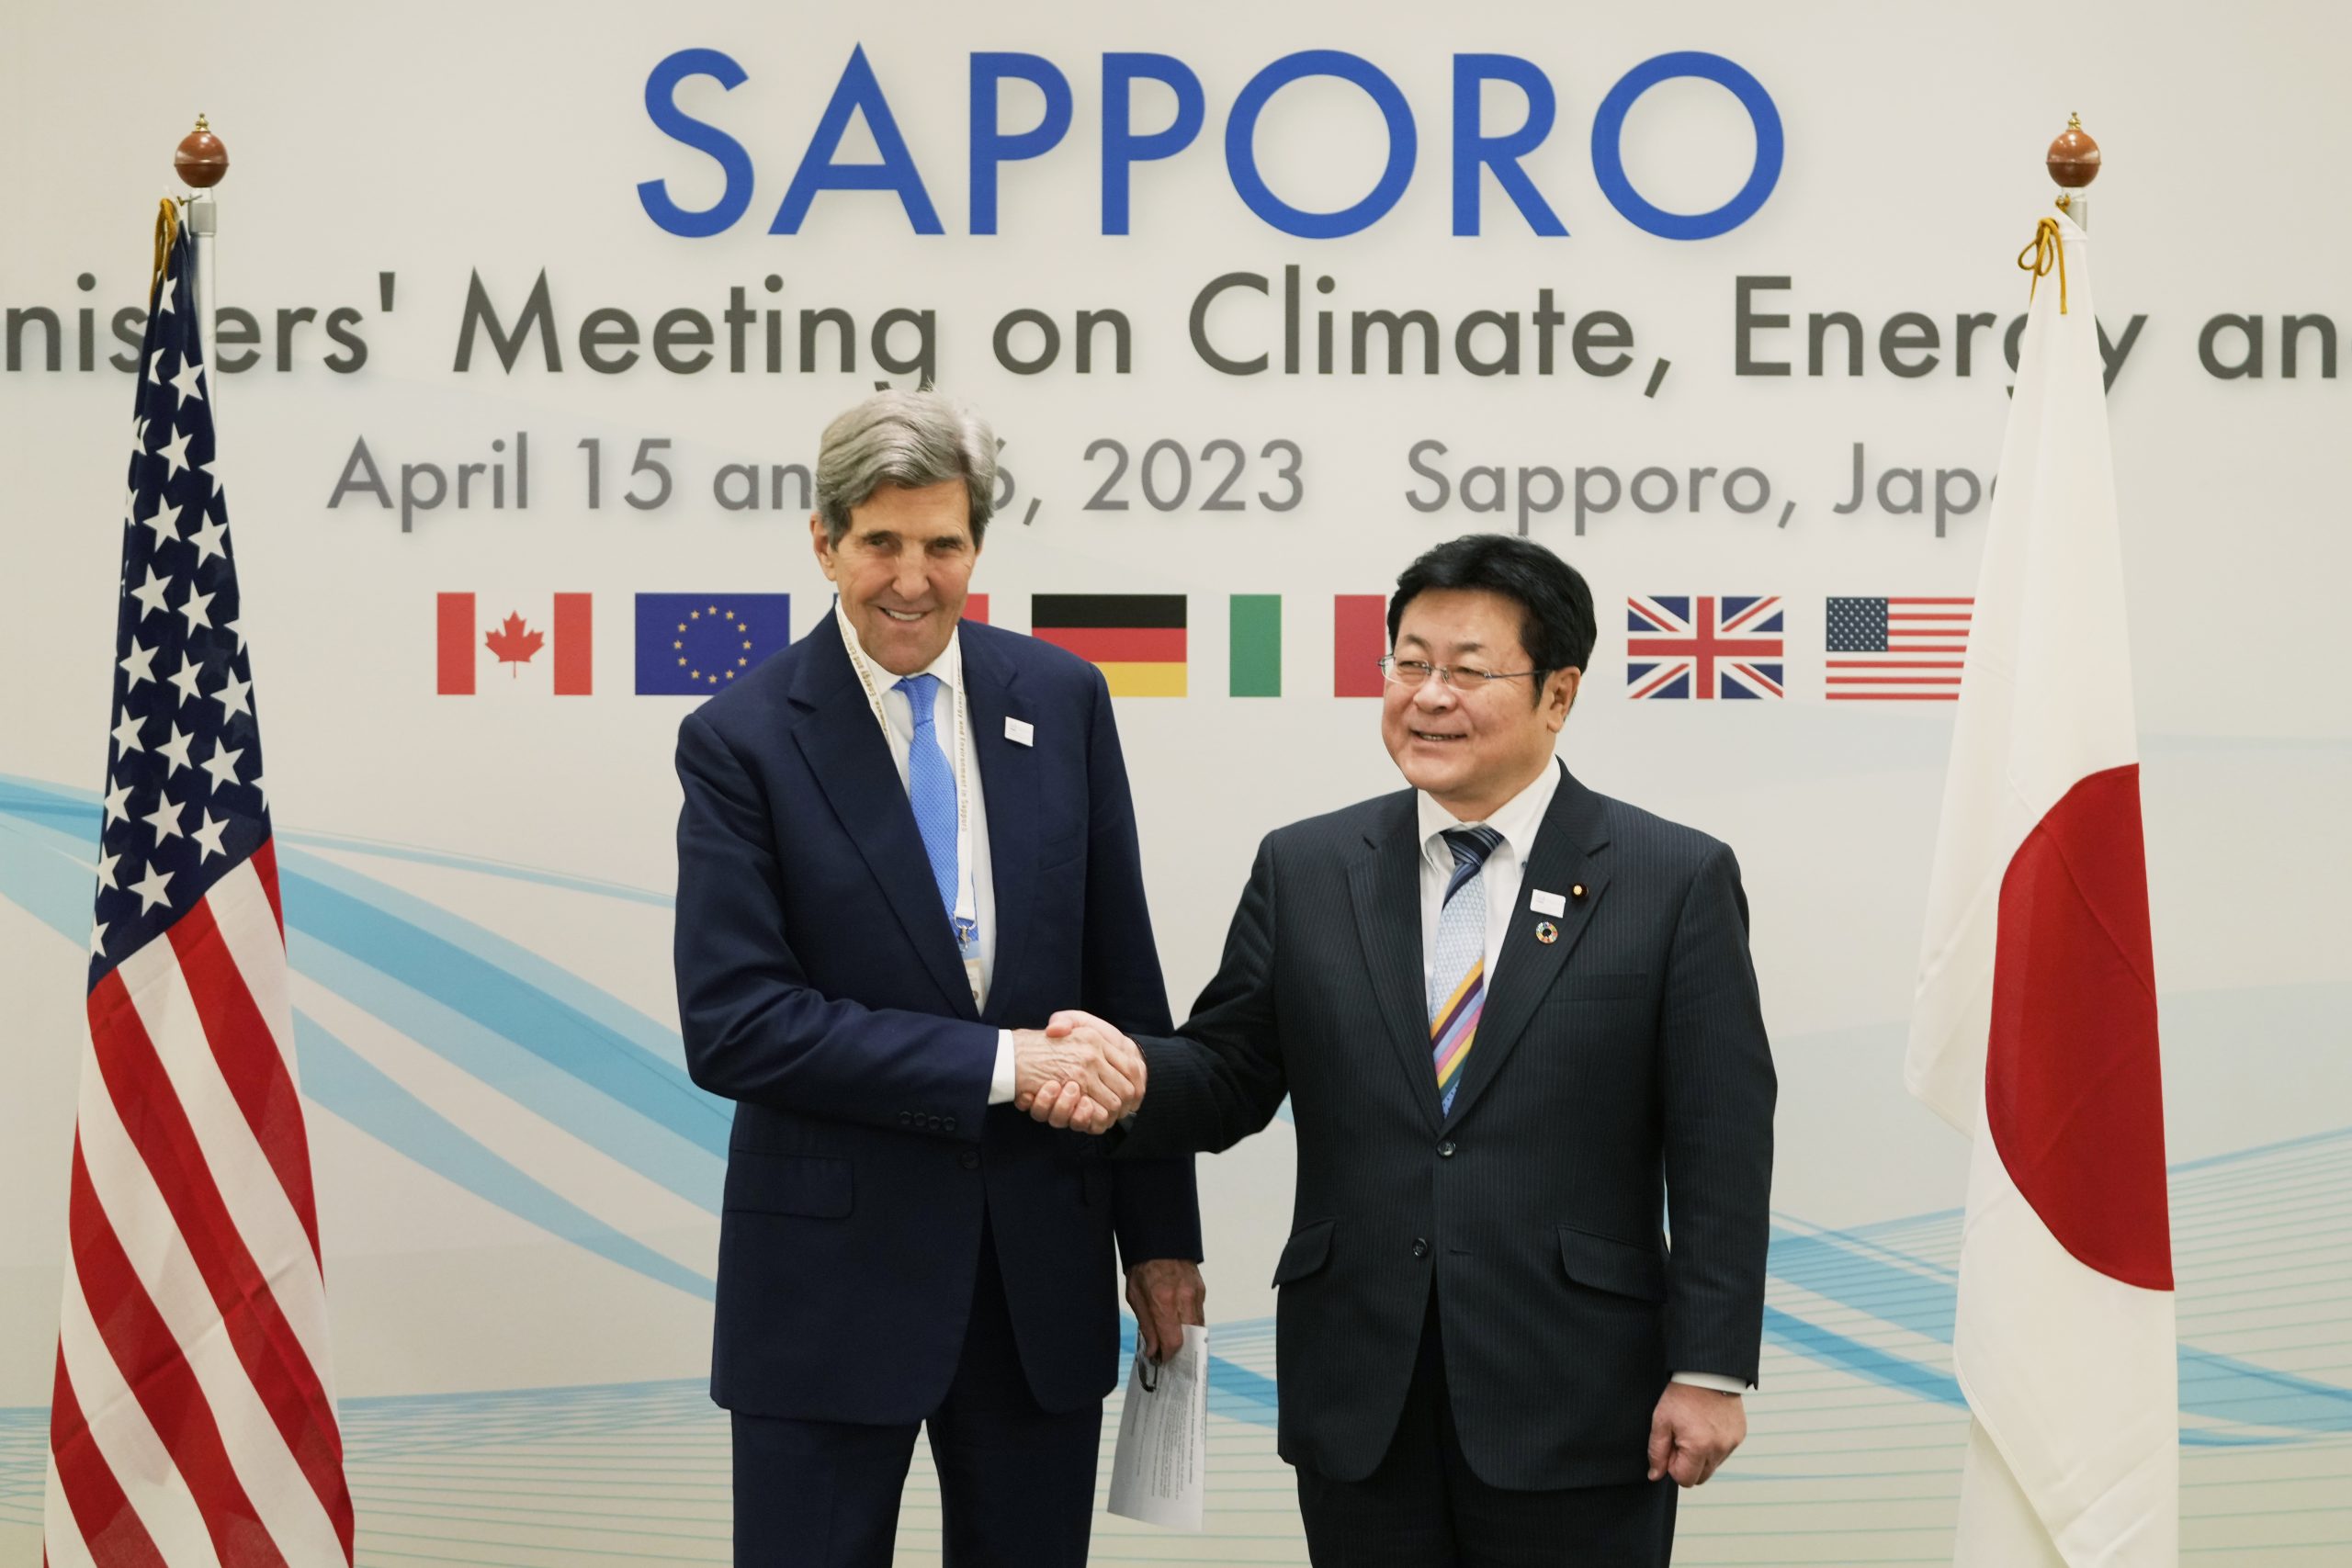 Climate envoy Kerry: No rolling back clean energy transition